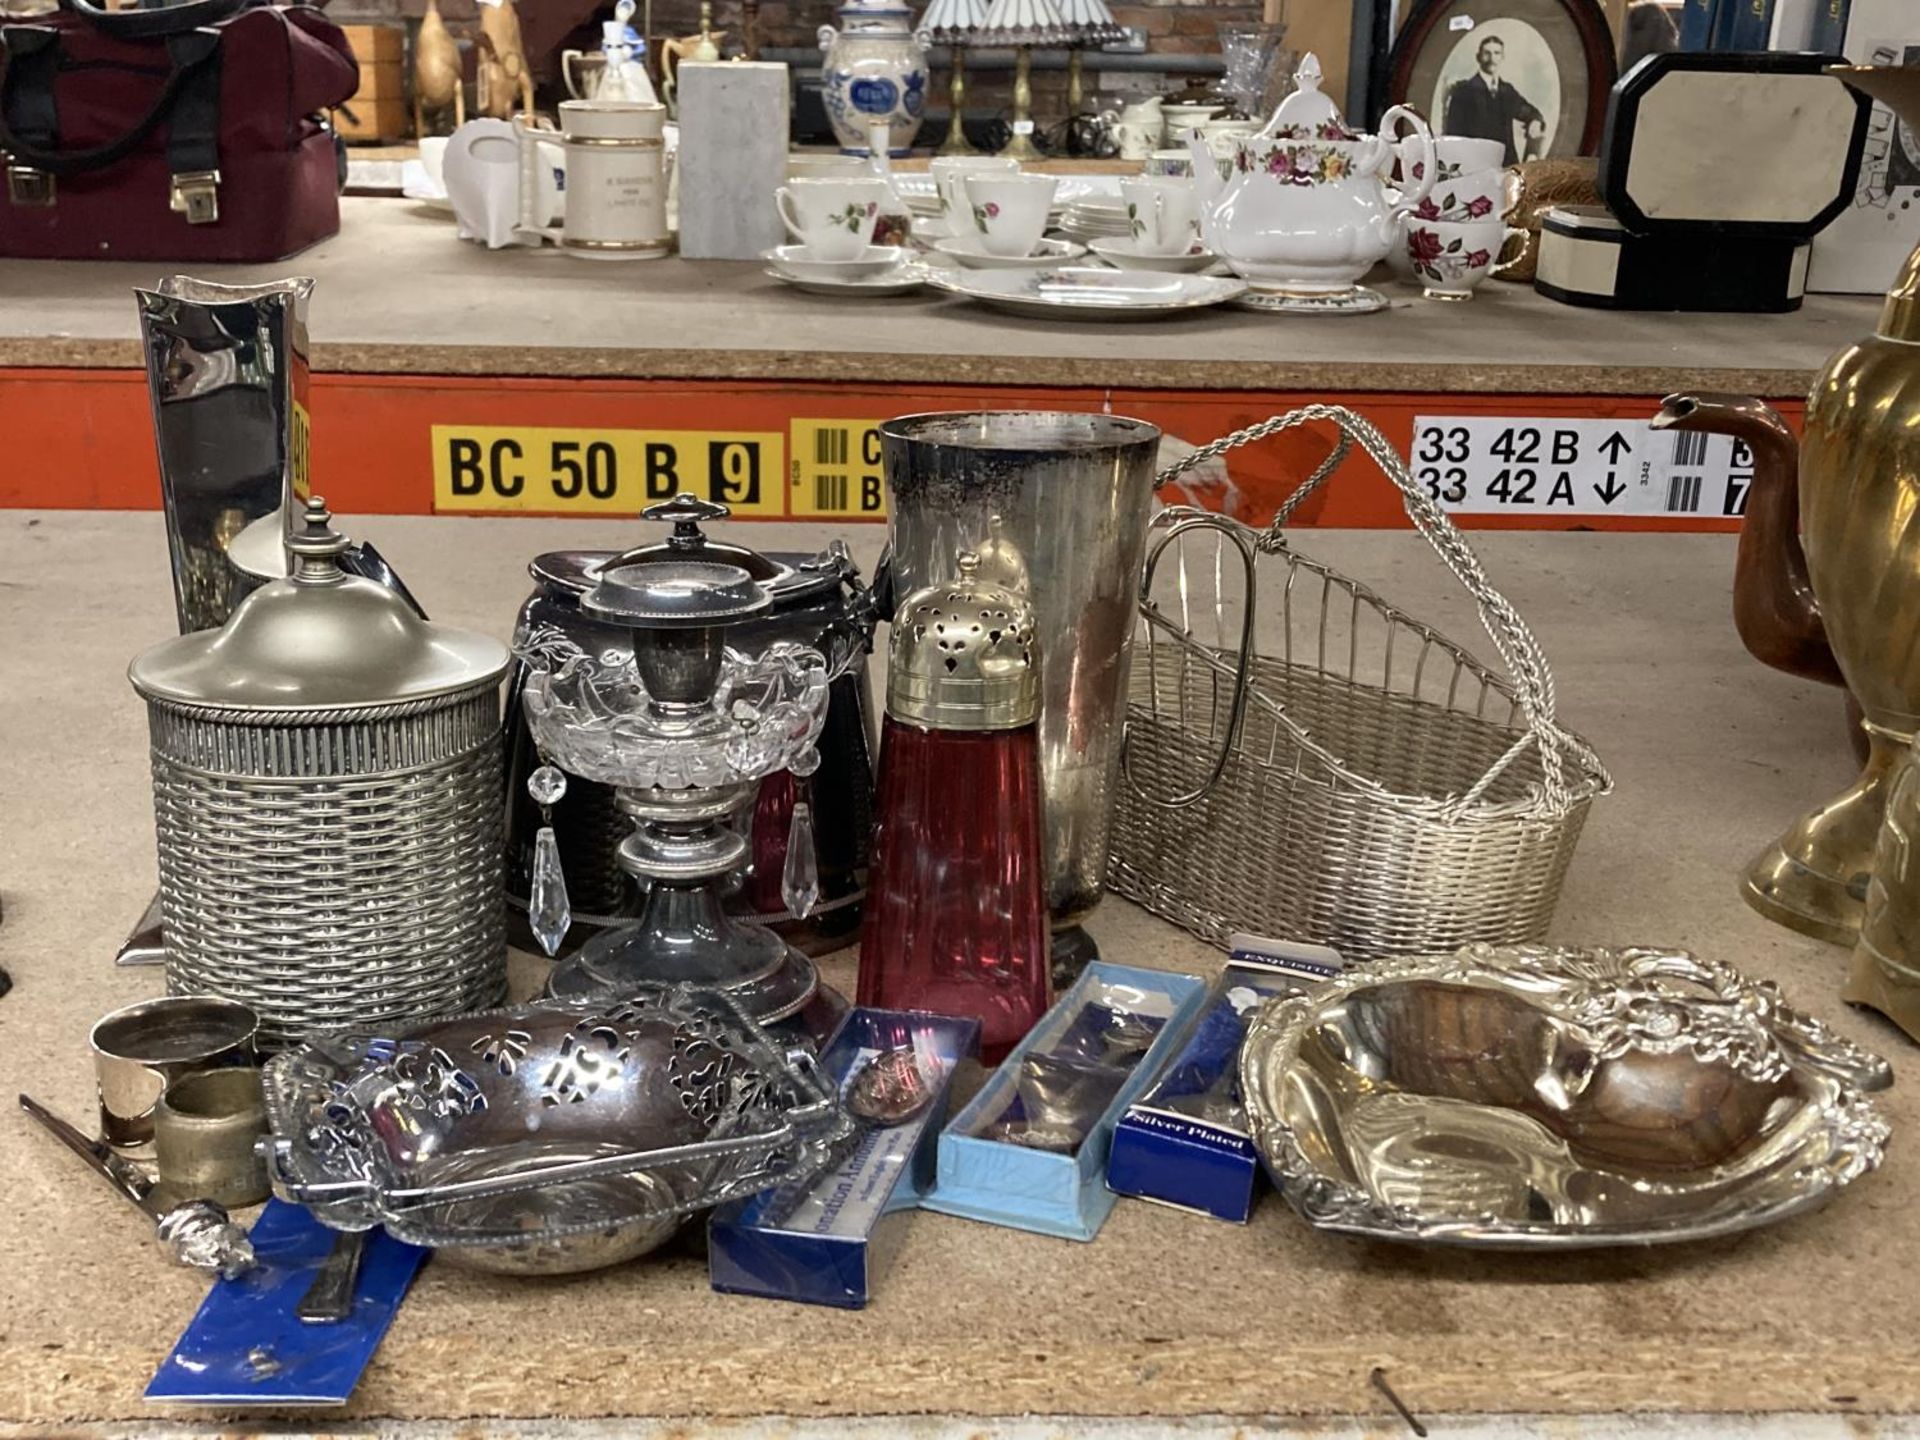 VARIOUS SILVER PLATED ITEMS TO INCLUDE A WINE BASKET, DISH, TEAPOT, LIDDED JAR ETC